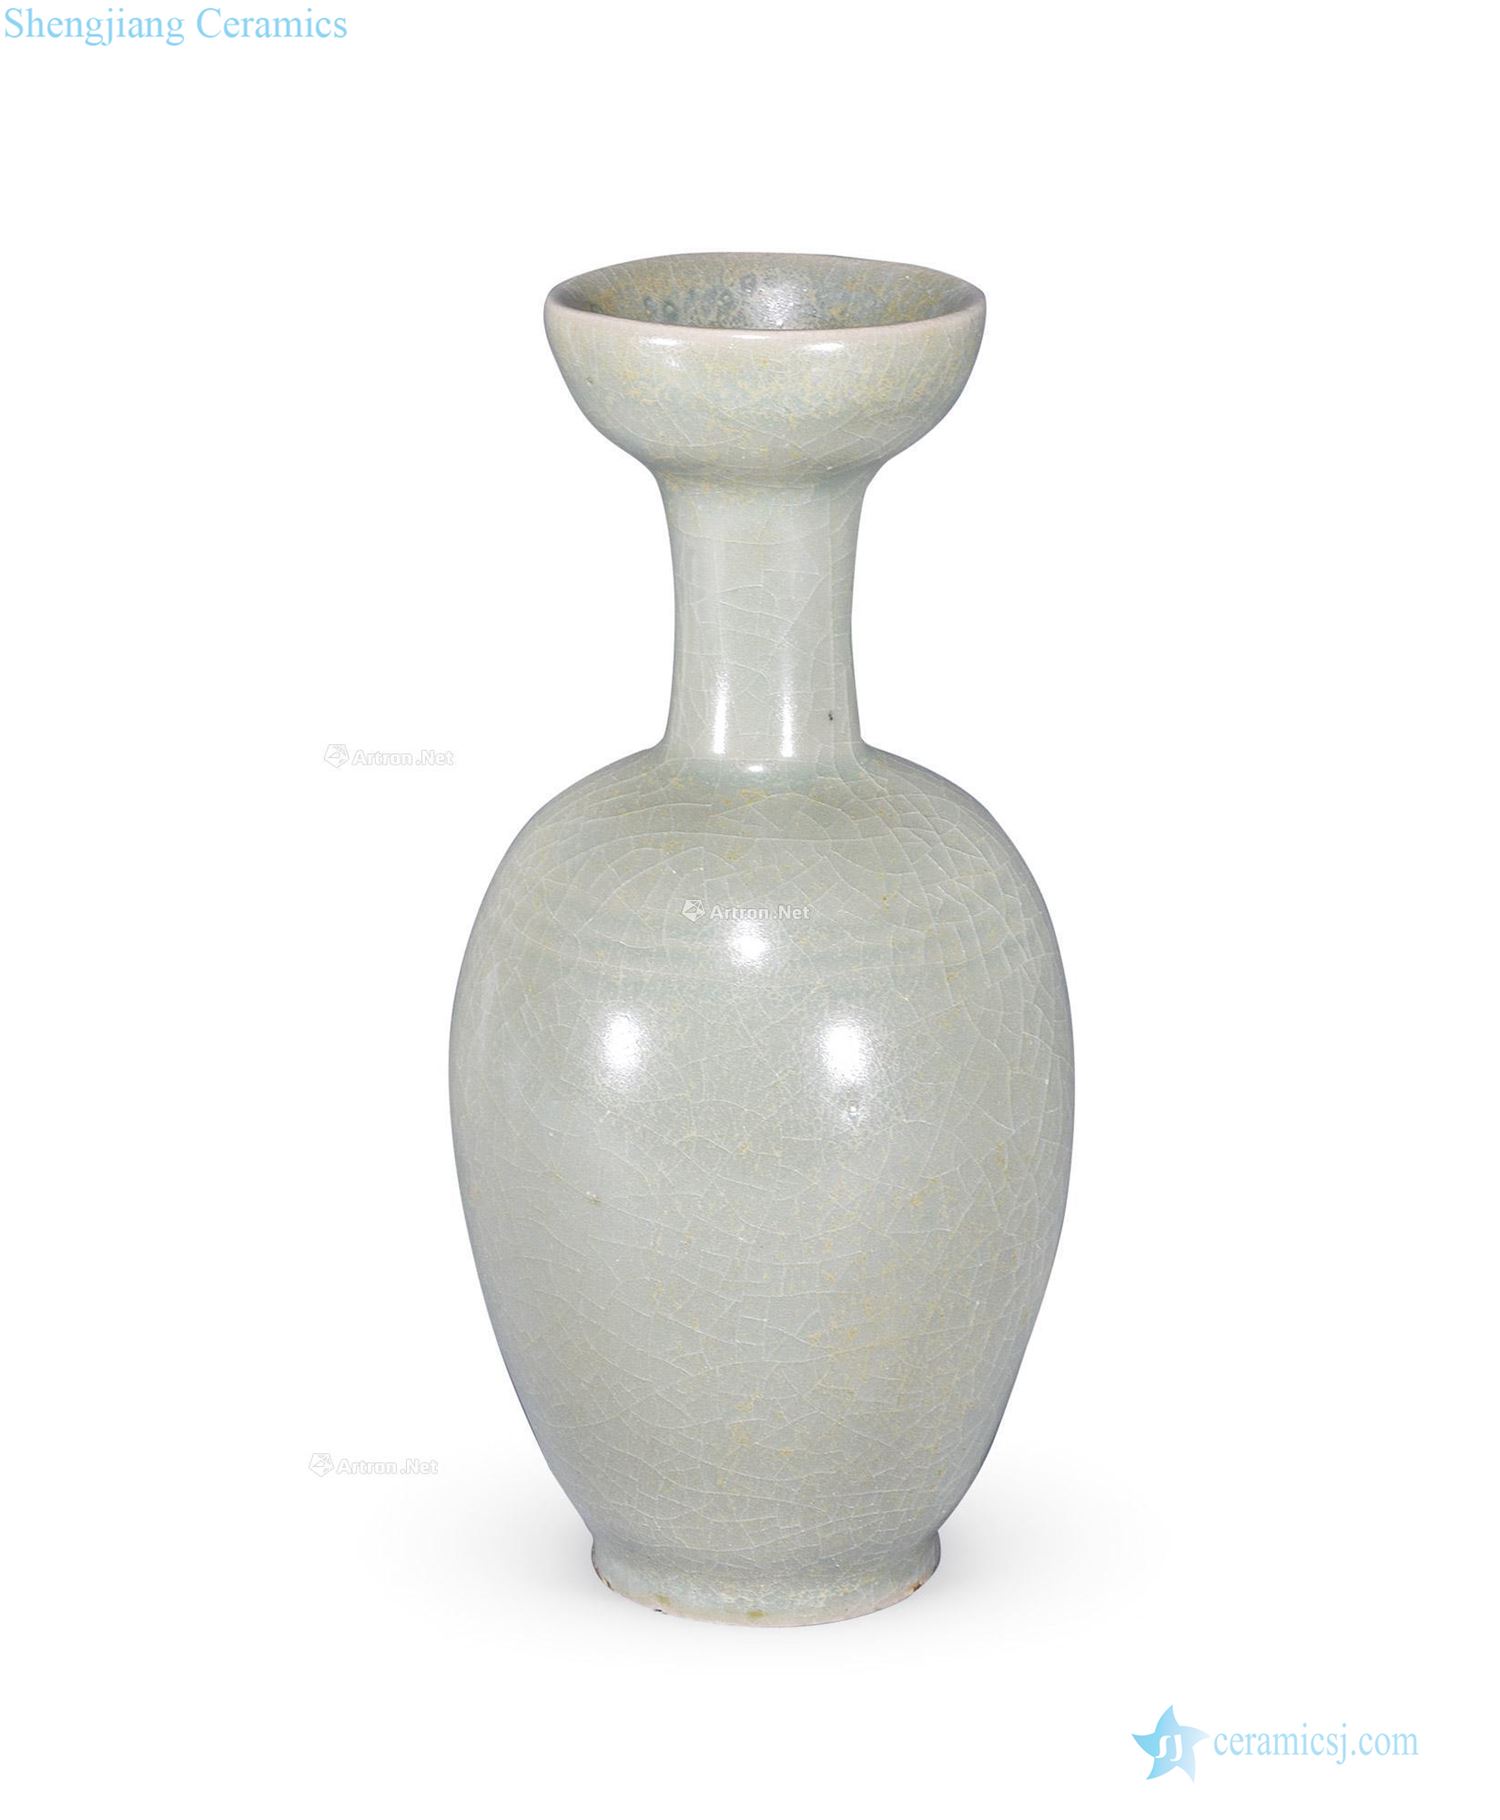 The song dynasty Your kiln dish in the bottle